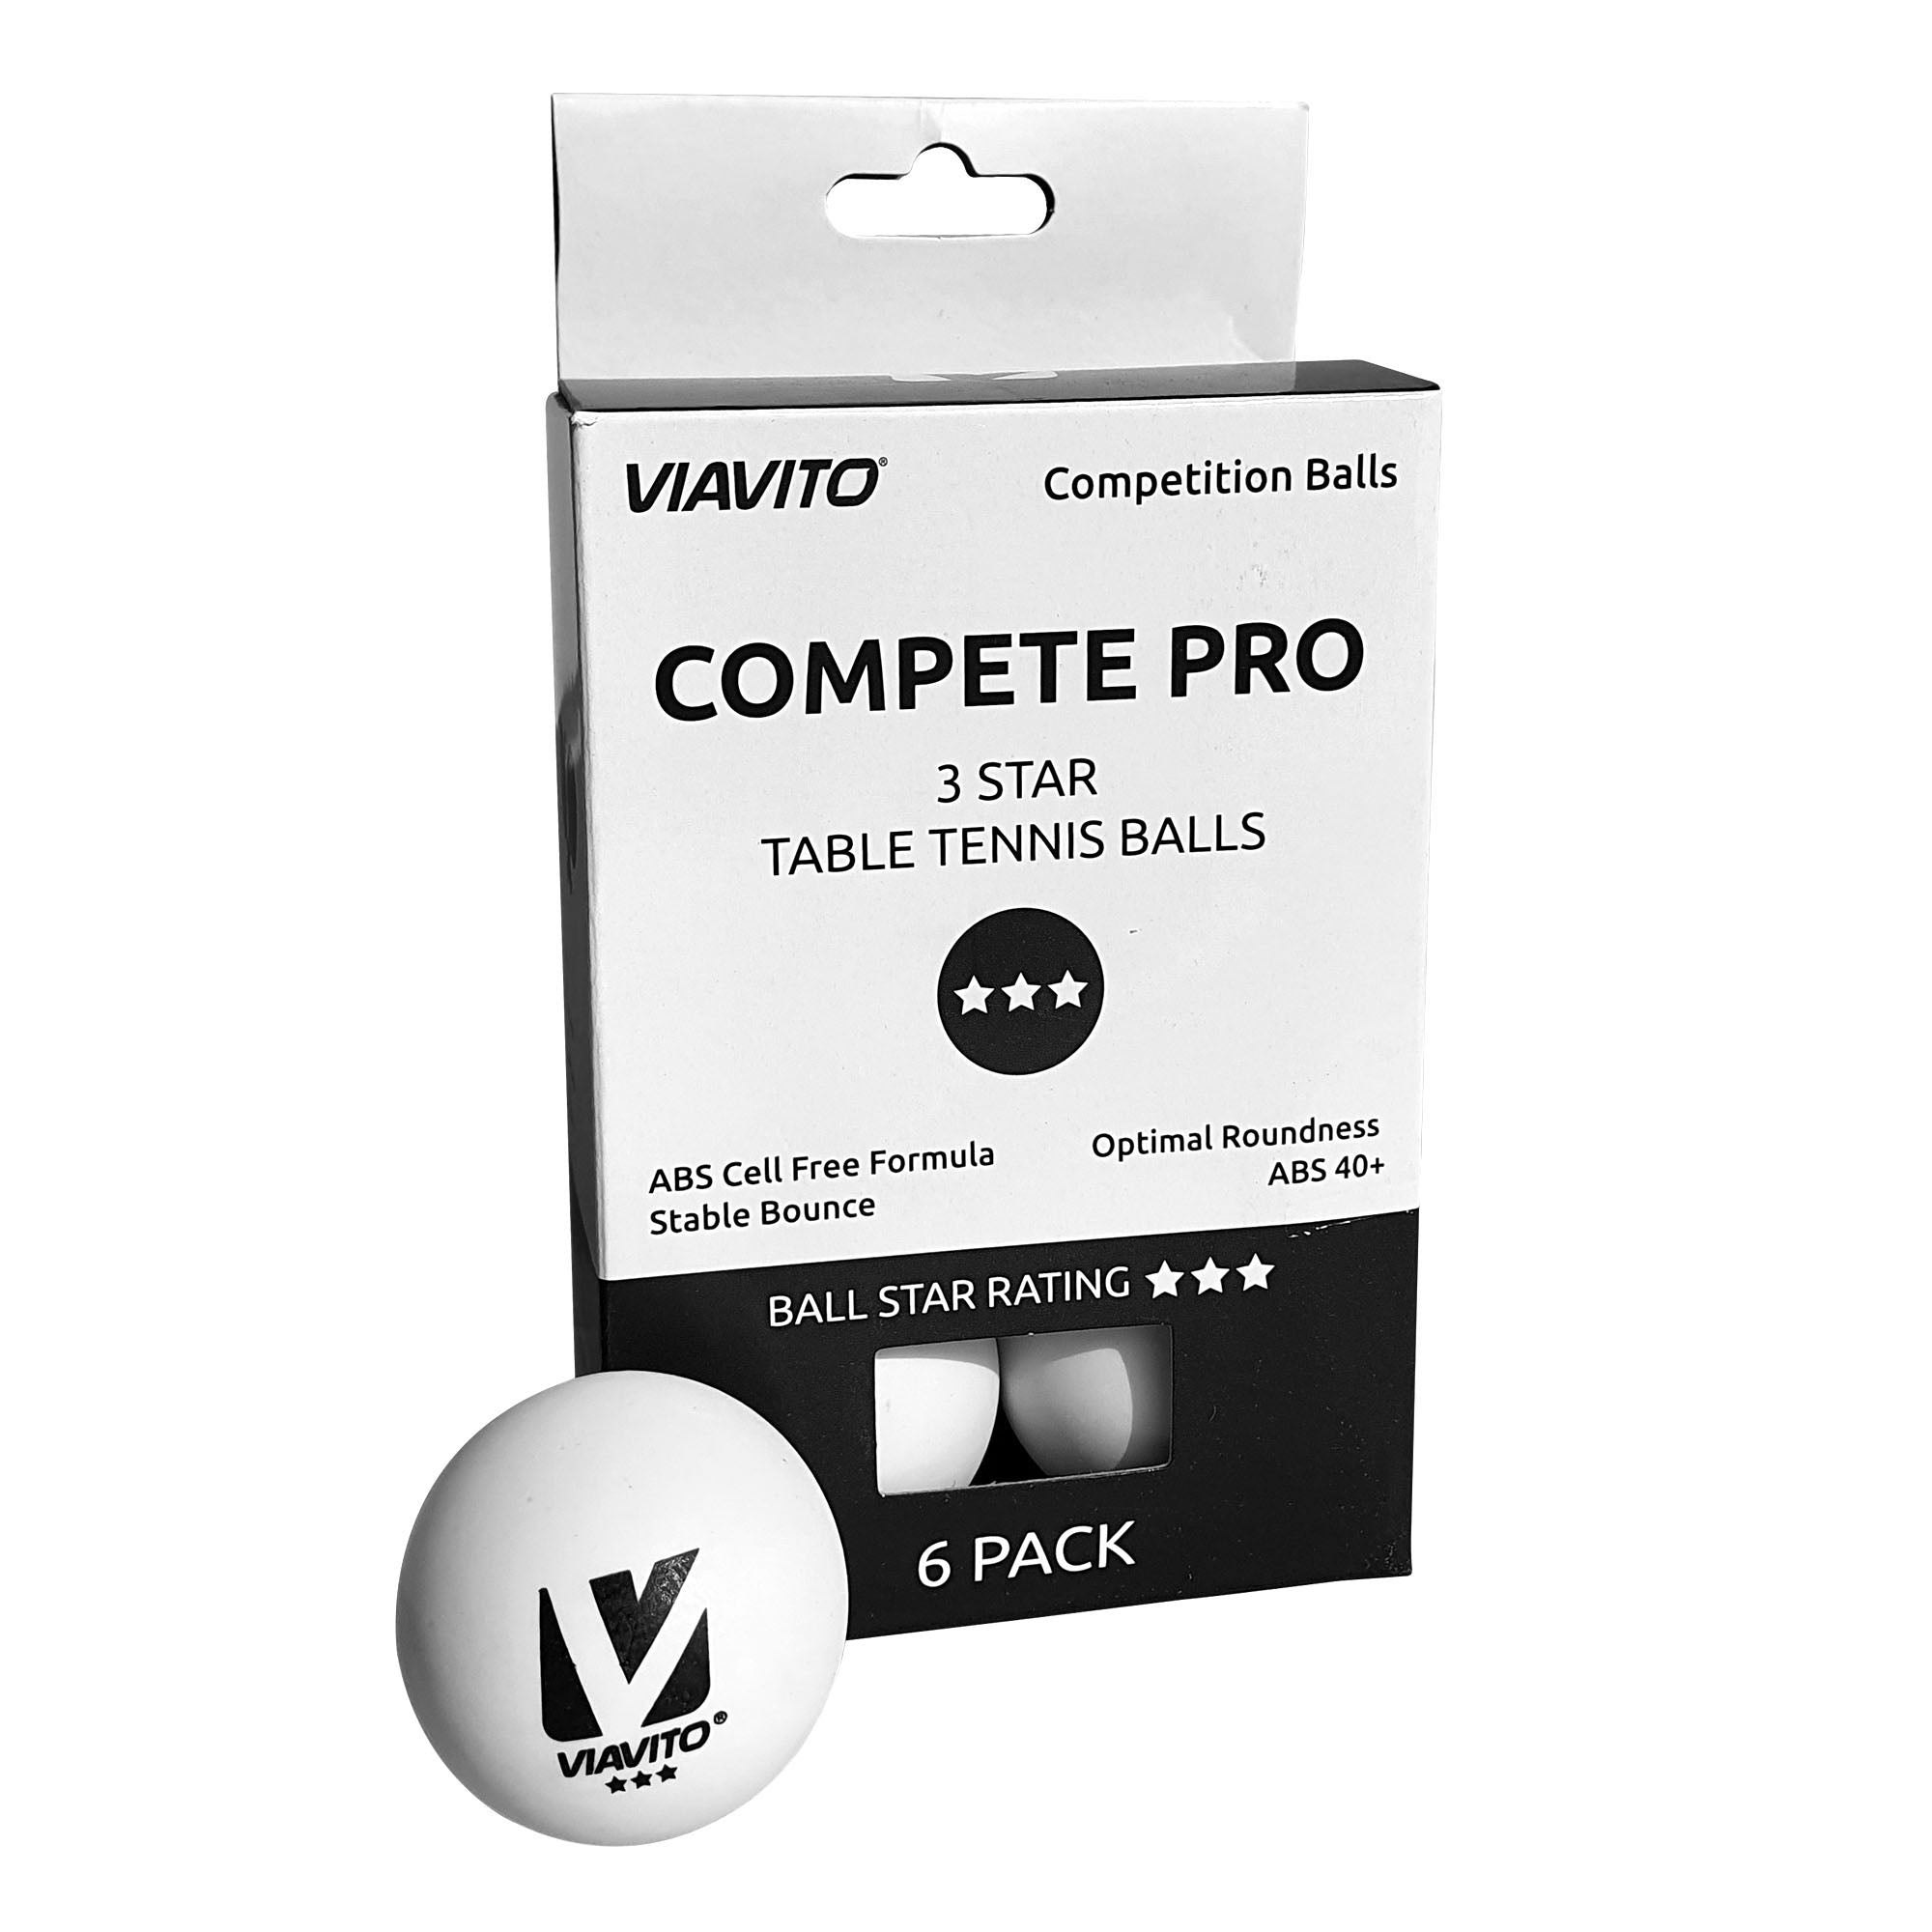 Viavito Compete Pro 3 Star Table Tennis Balls - Pack of 6